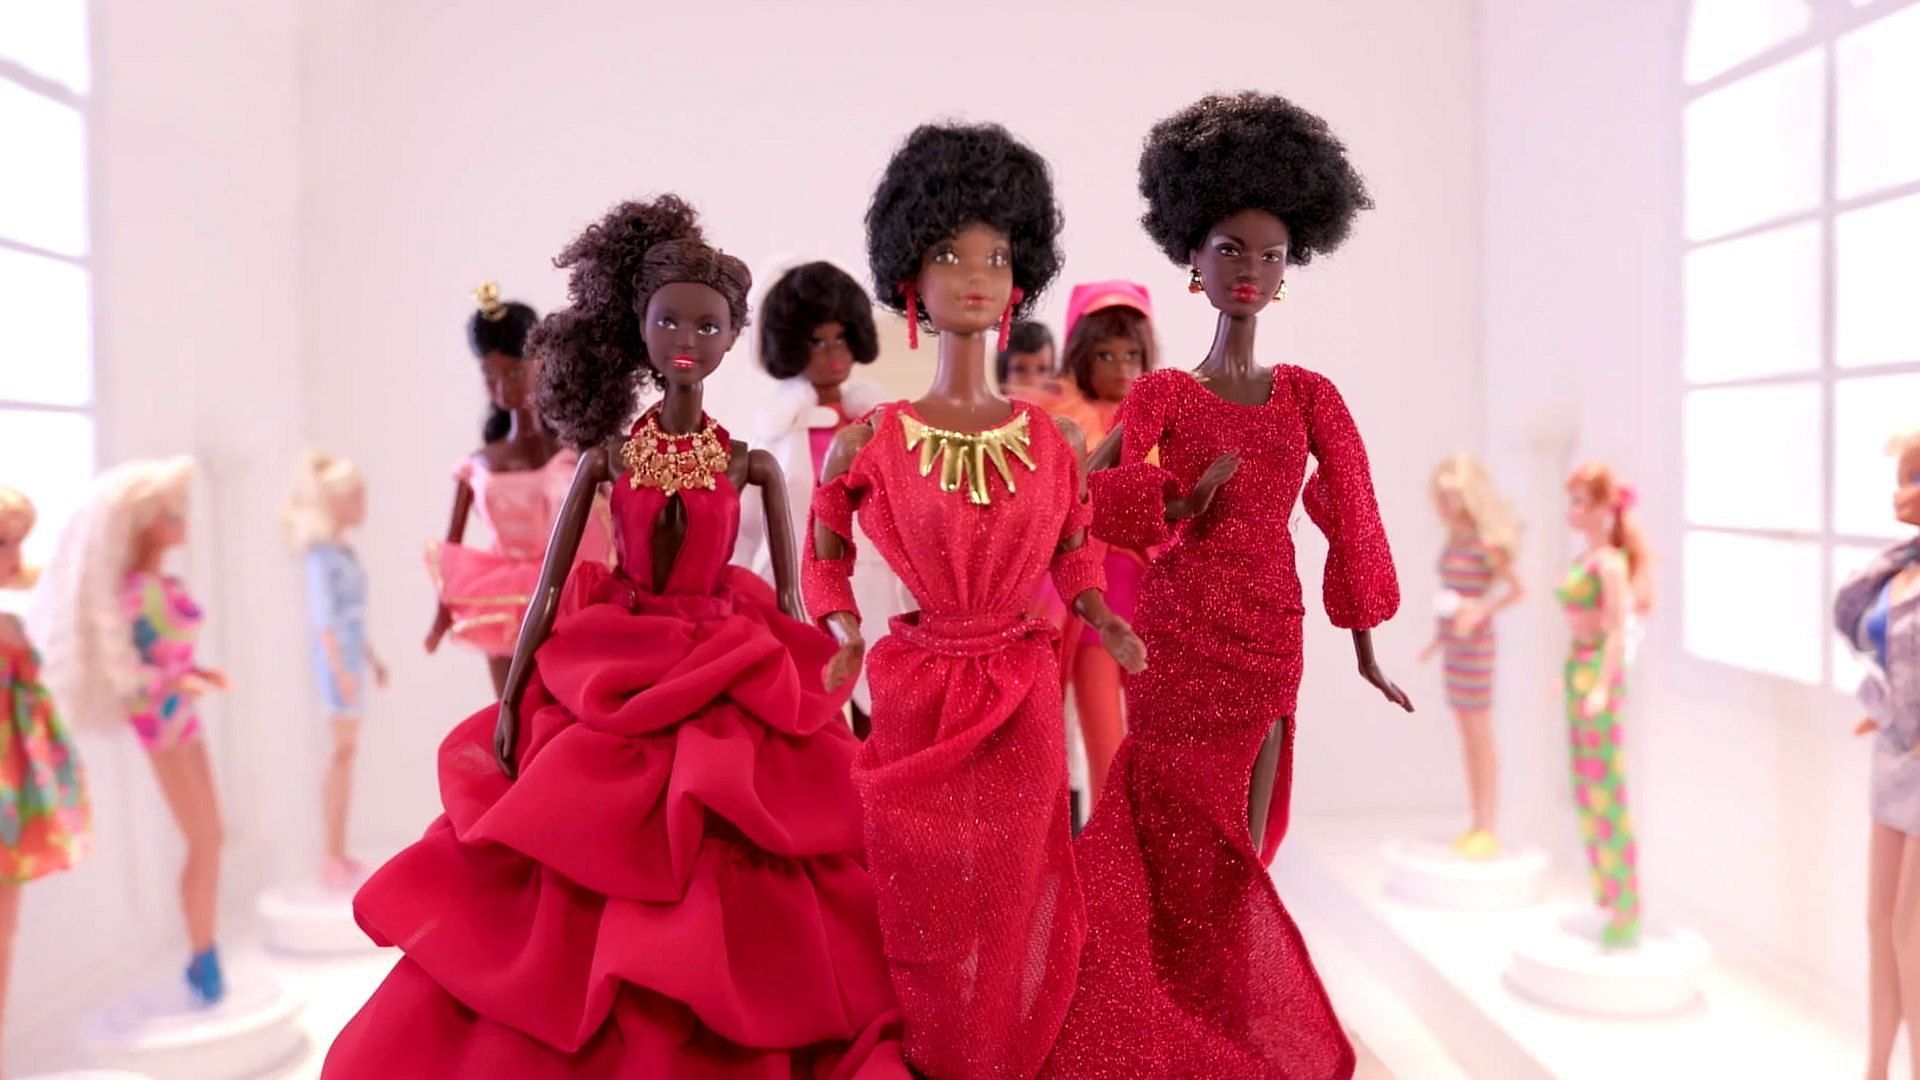 An image from Black Barbie: A Documentary (Image via X/Black Barbie: A New Documentary)